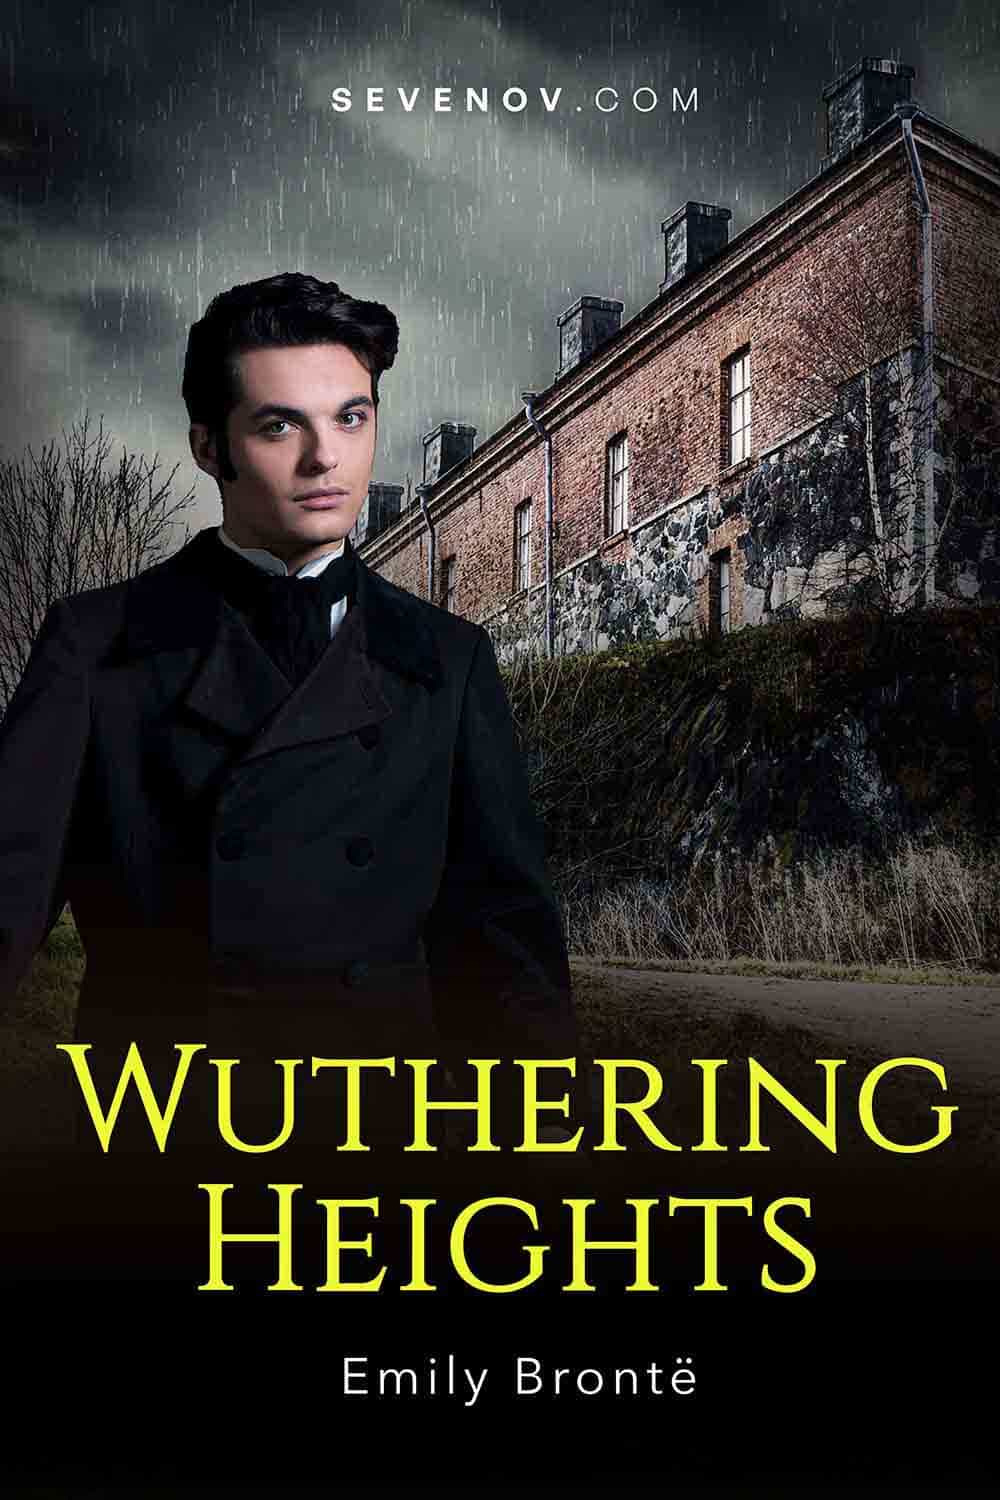 https://pagevio.com/wp-content/uploads/2022/11/wuthering-heights-20220620.jpg